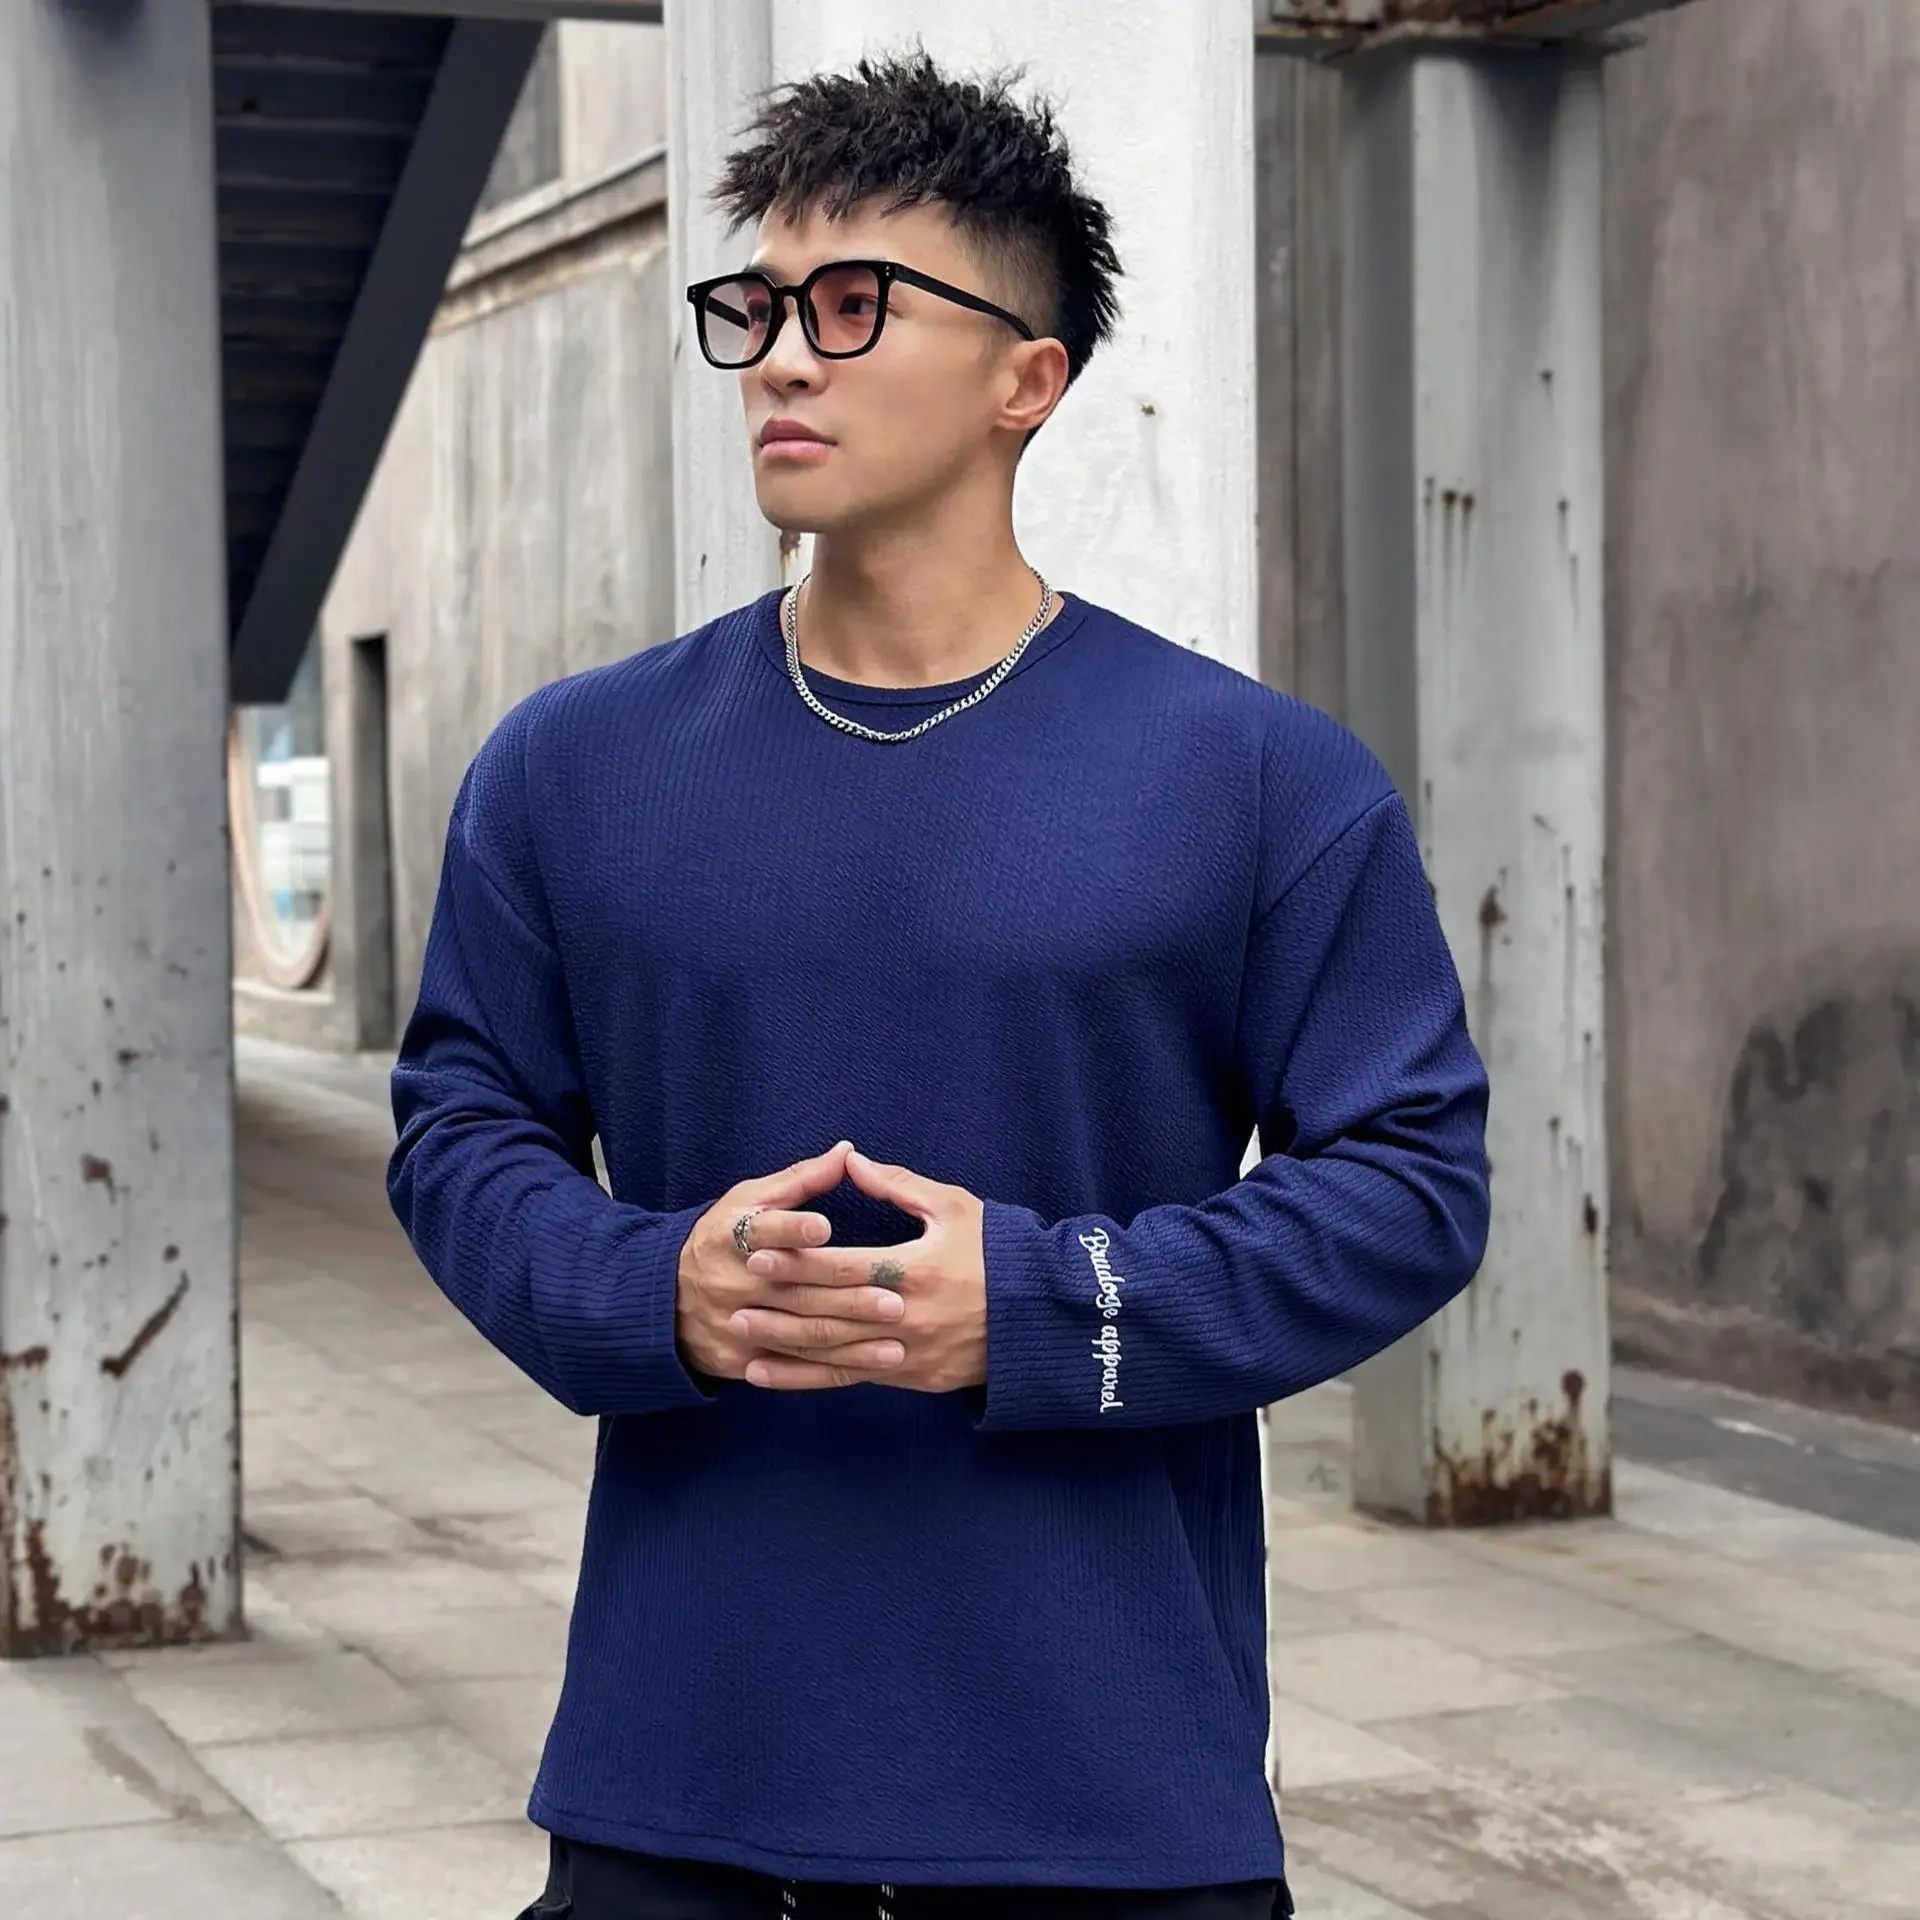 

O-Neck Texture And Drape Feeling Men's Long Sleeved T-Shirt Sports Fitness Running Training Clothes Loose Oversized Long Sleeved